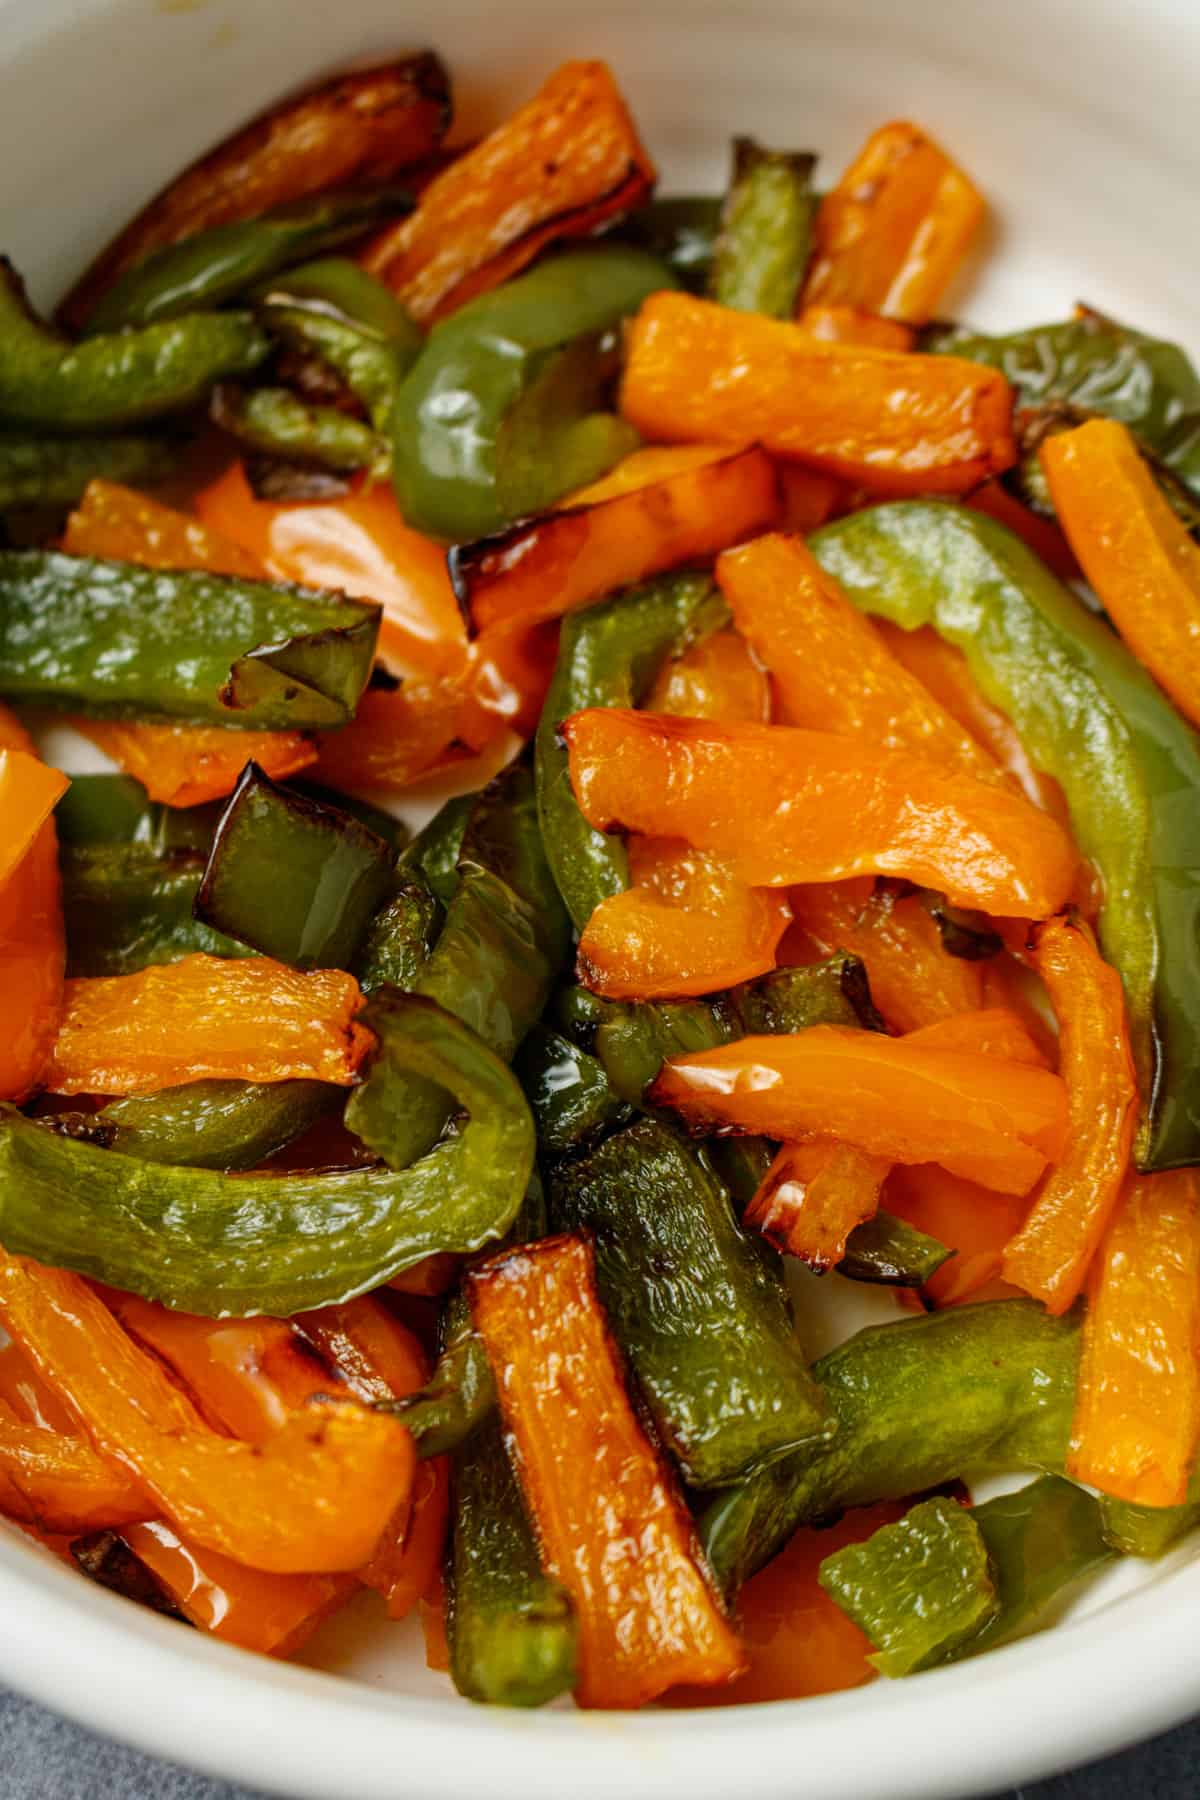 A close up of cooked green and orange bell peppers in a white serving dish.